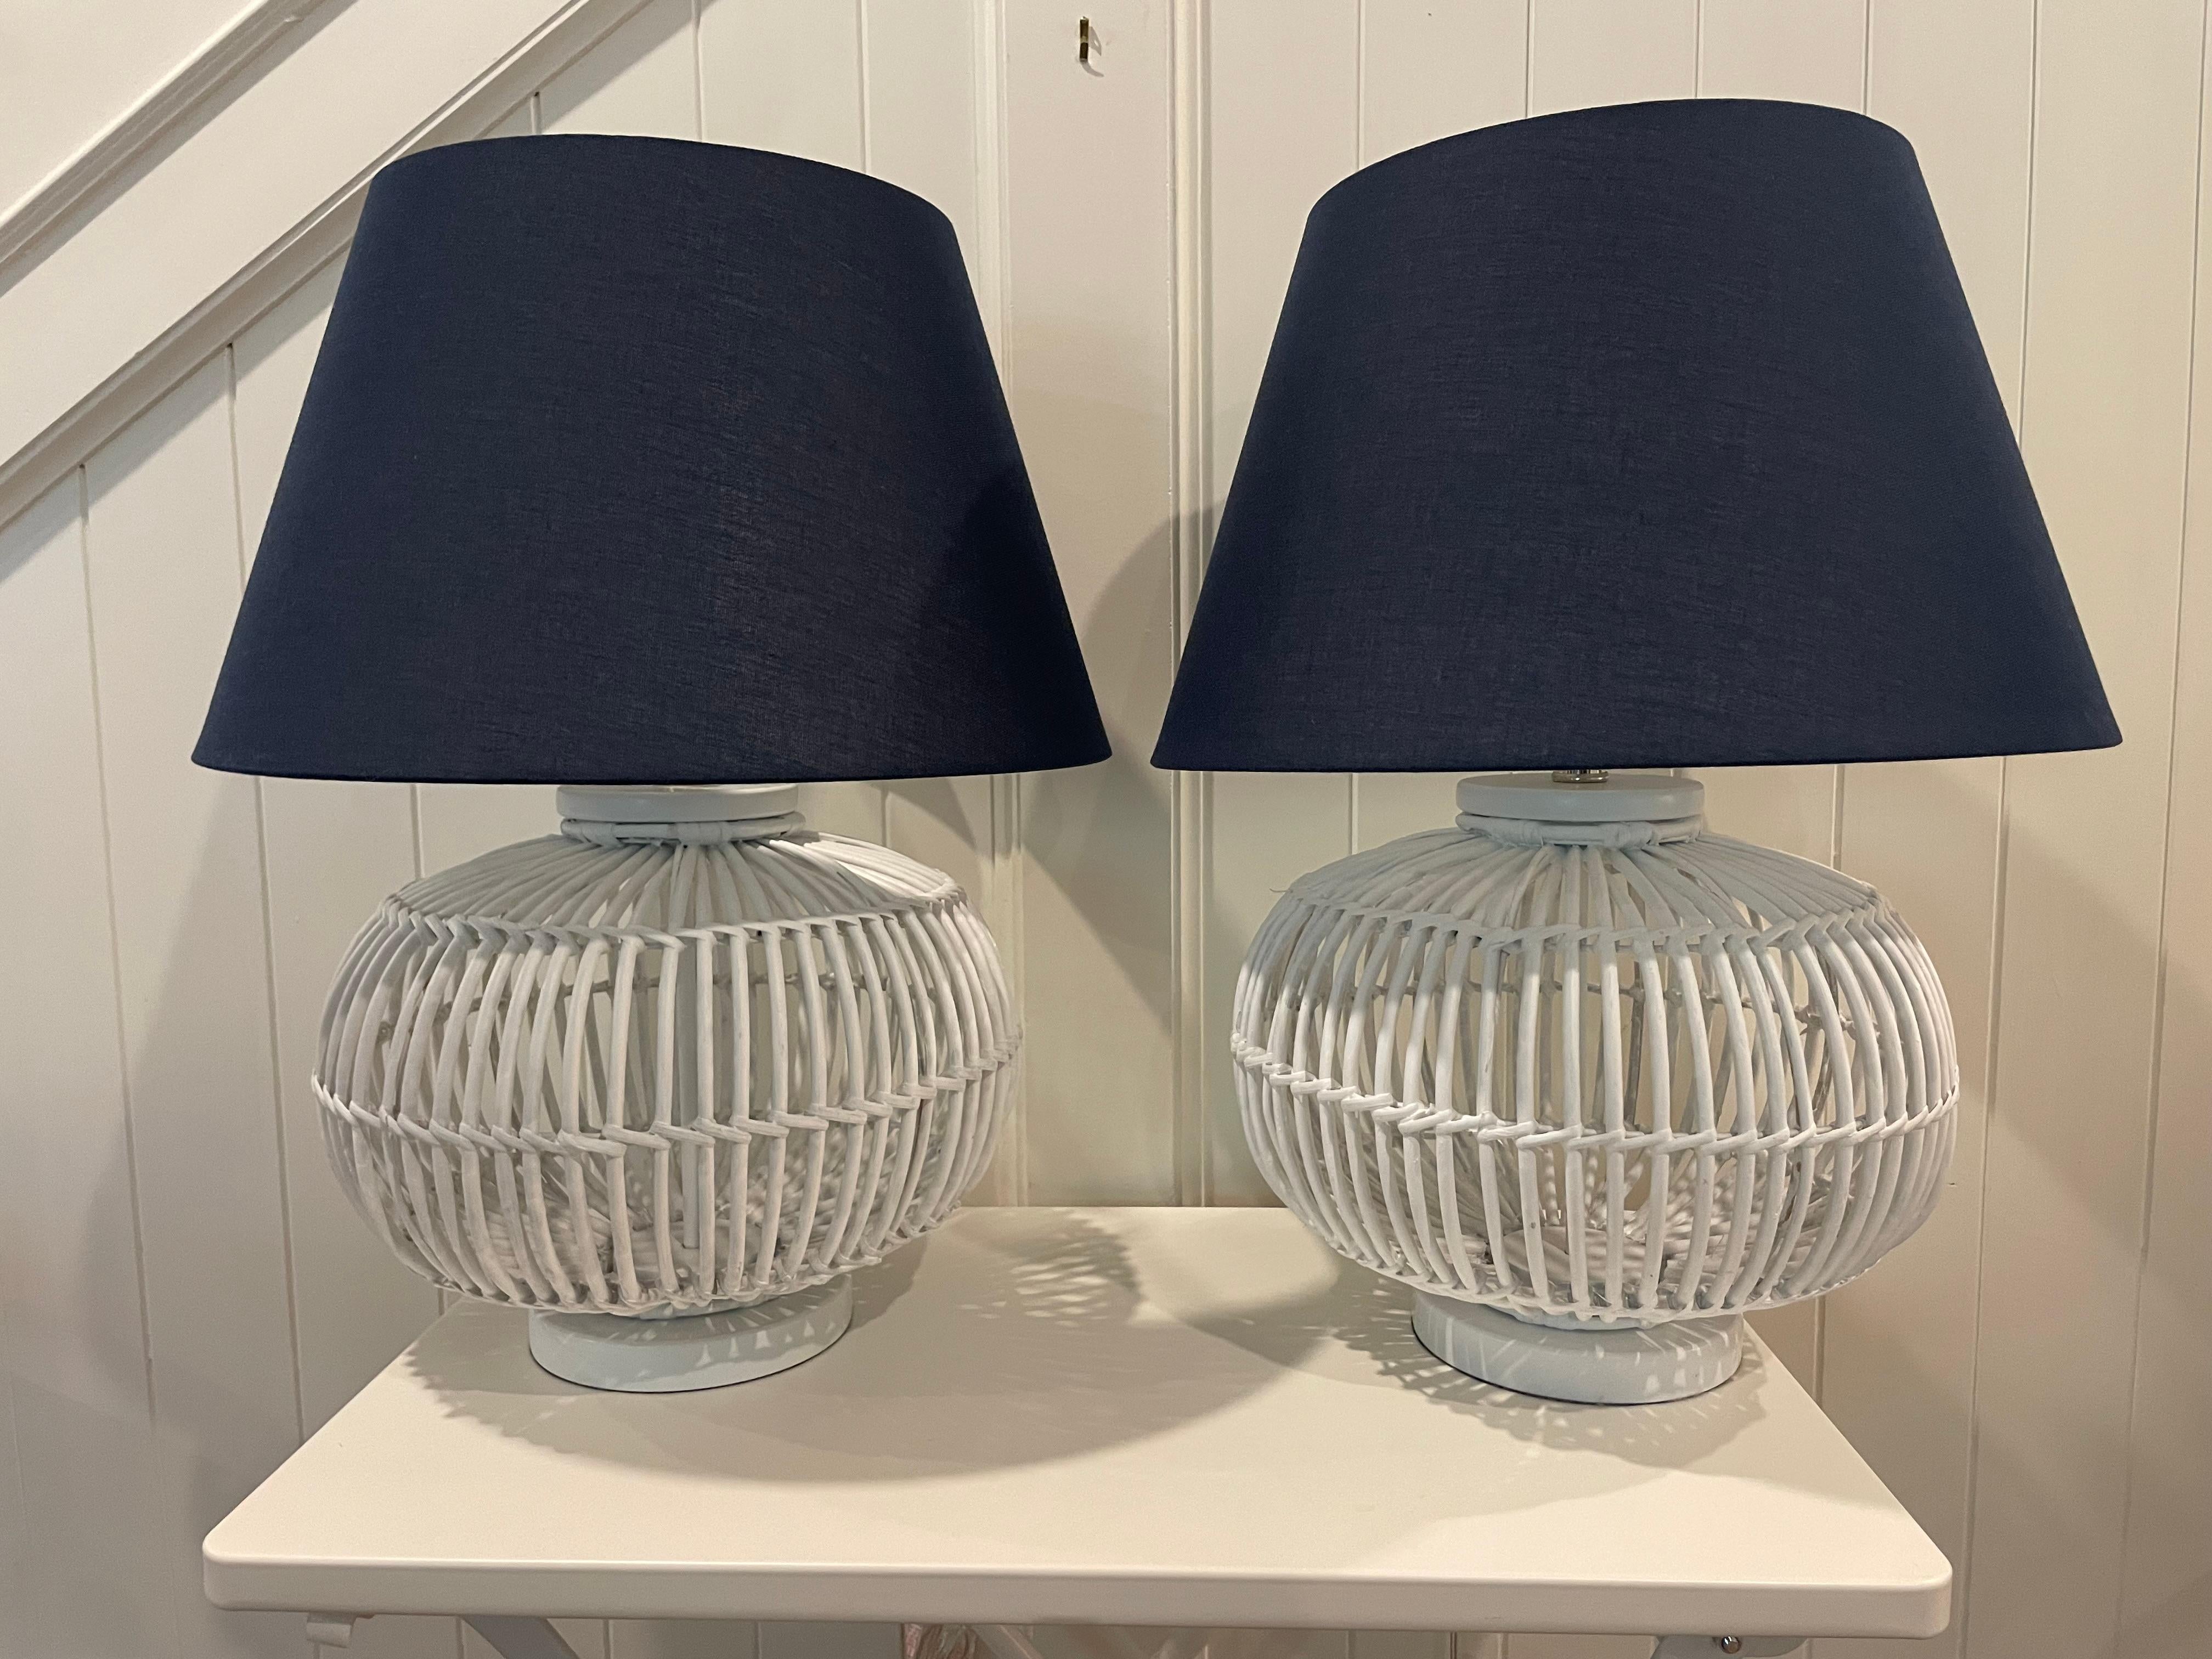 Pair of very attractive coastal style table lamps by Lauren Ralph Lauren. Elaborate hand bent and painted rattan with crisp navy shades and gold finials, the perfect lamps for a beach house, sunroom or for a chic look. The lamps are 14